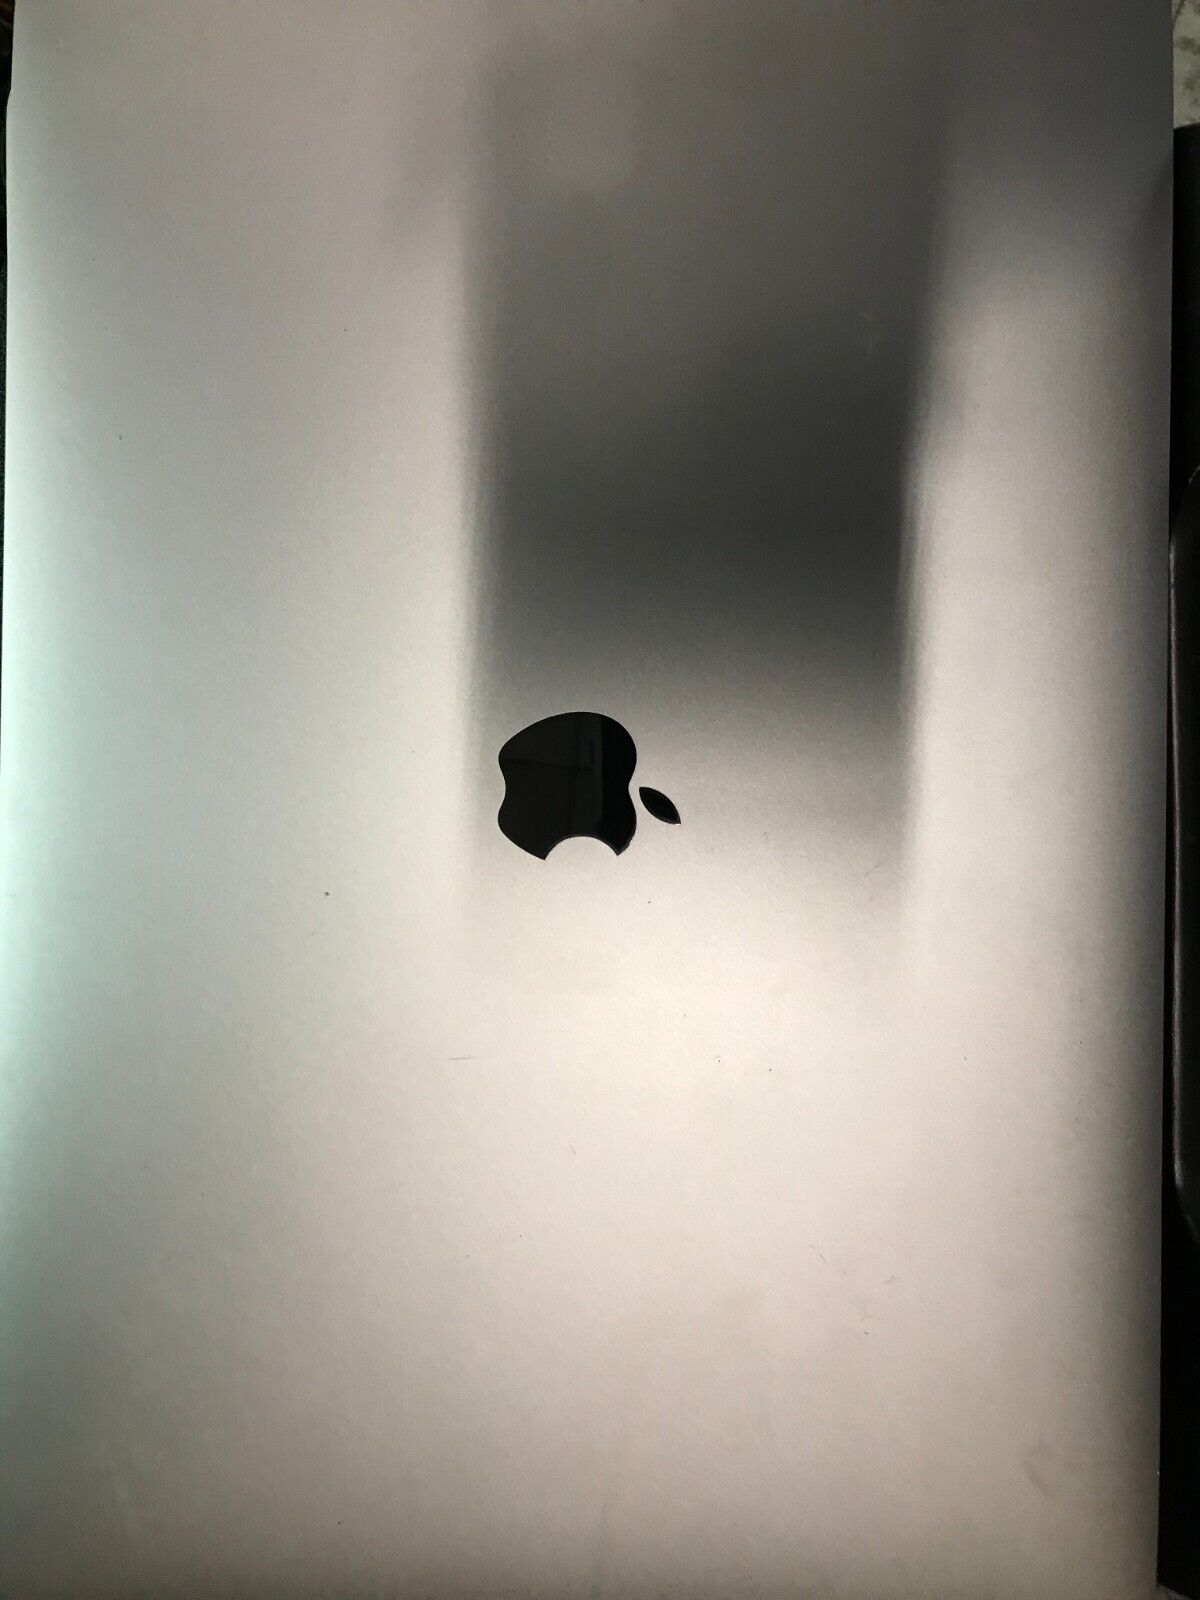 2020 MacBook AIR  AS IS PARTS  EVERYTHING, LCD, BATTERY, TRACKPAD, NO POWER